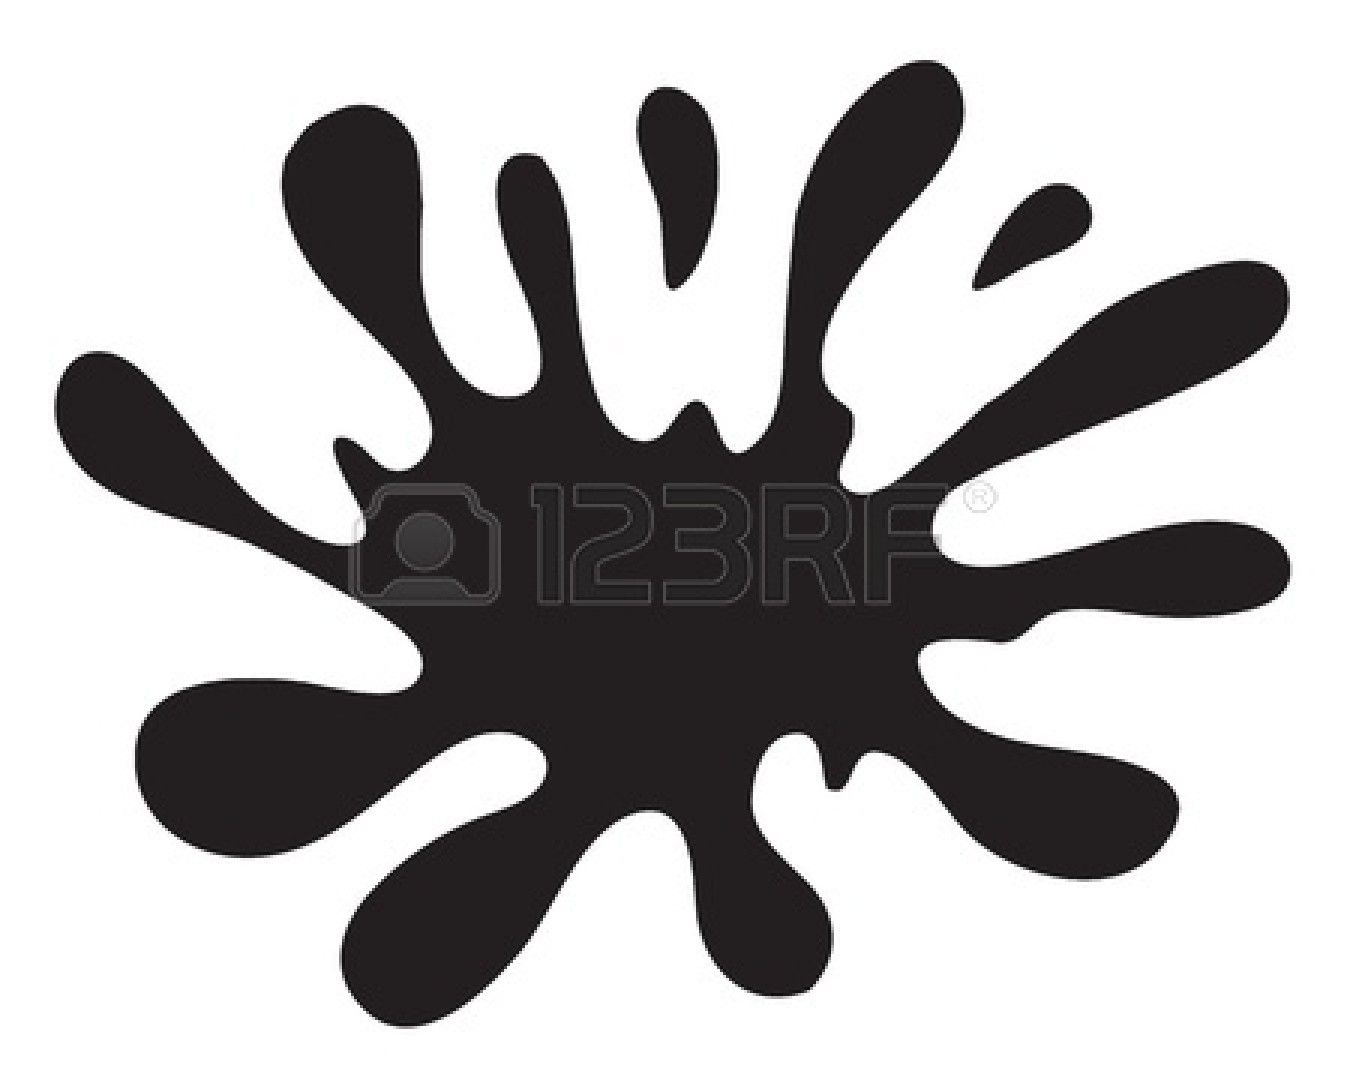 clipart free black and white images - photo #20